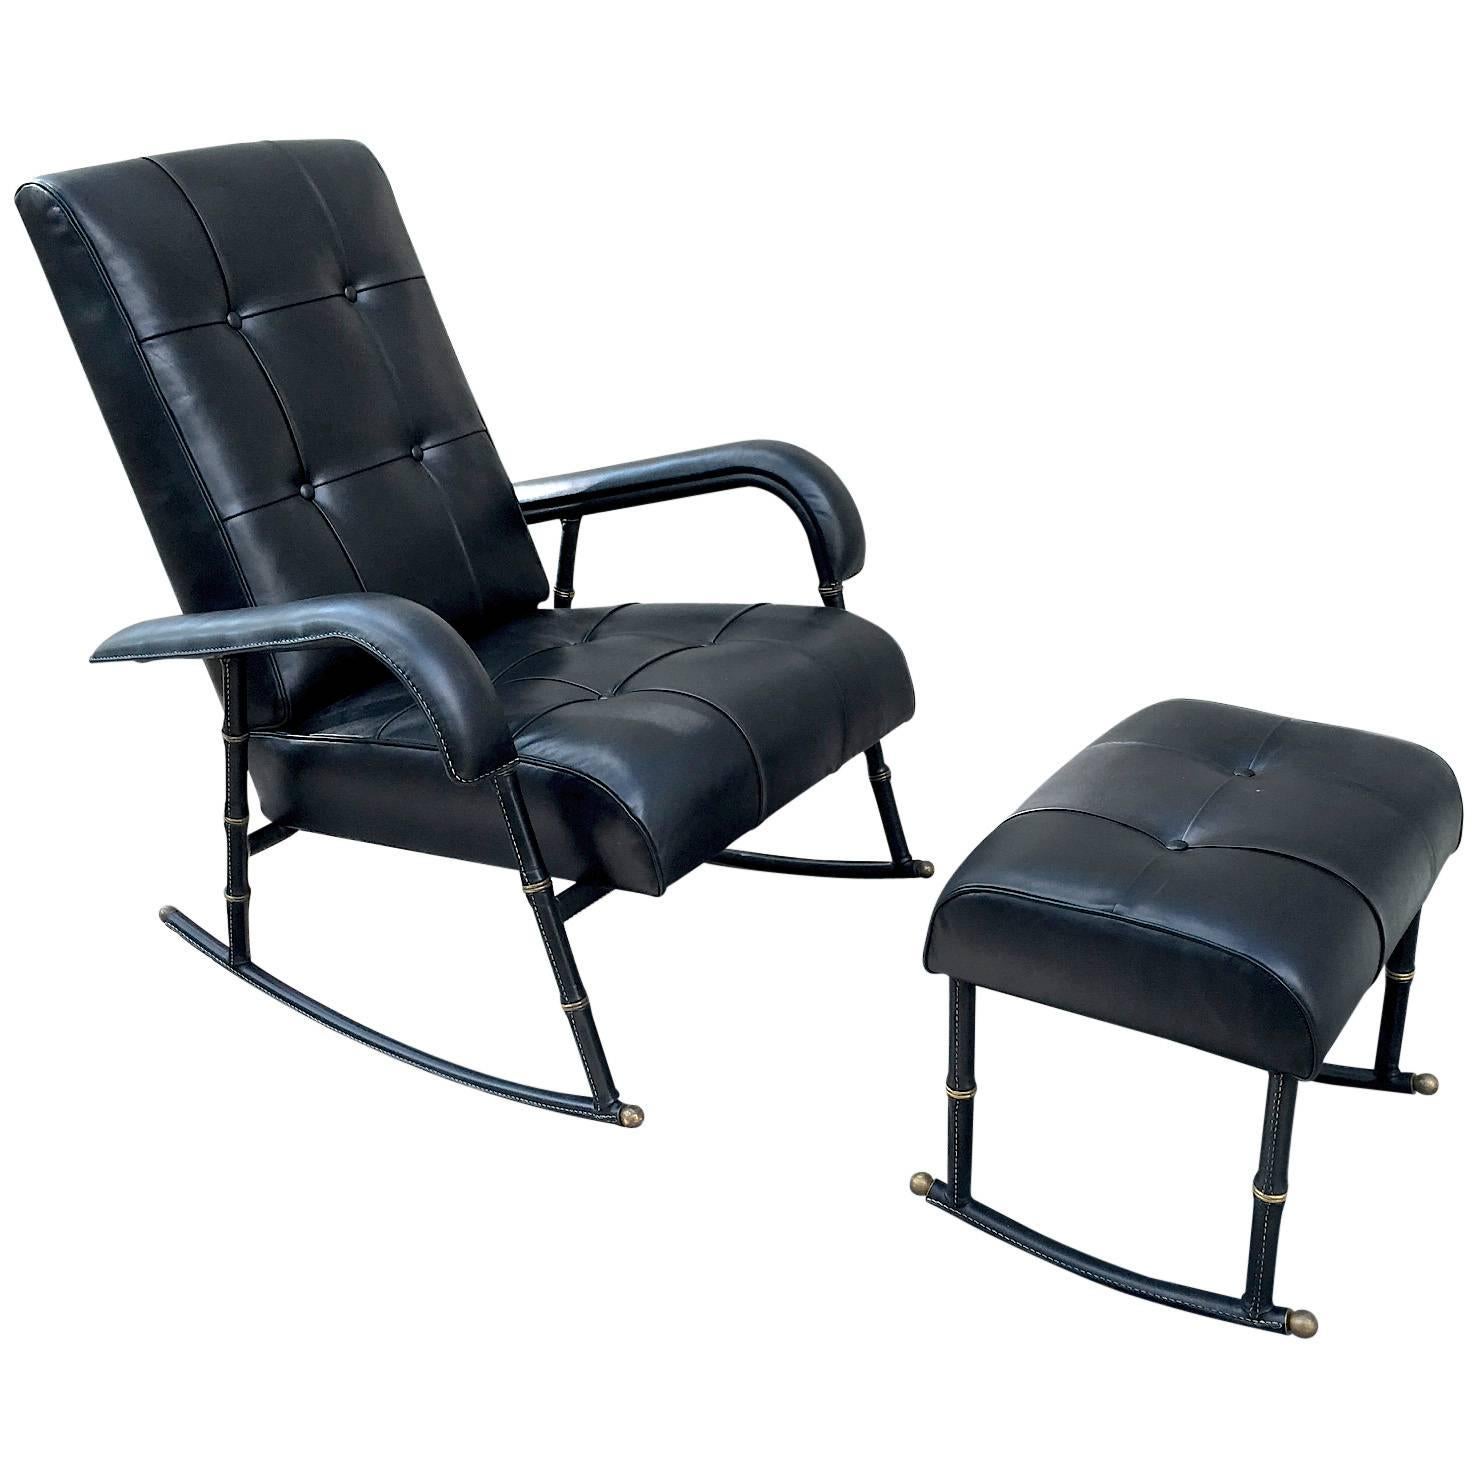 Jacques Adnet Rare Rocking Chair and Footstool in Black Hand-Stitched Leather For Sale